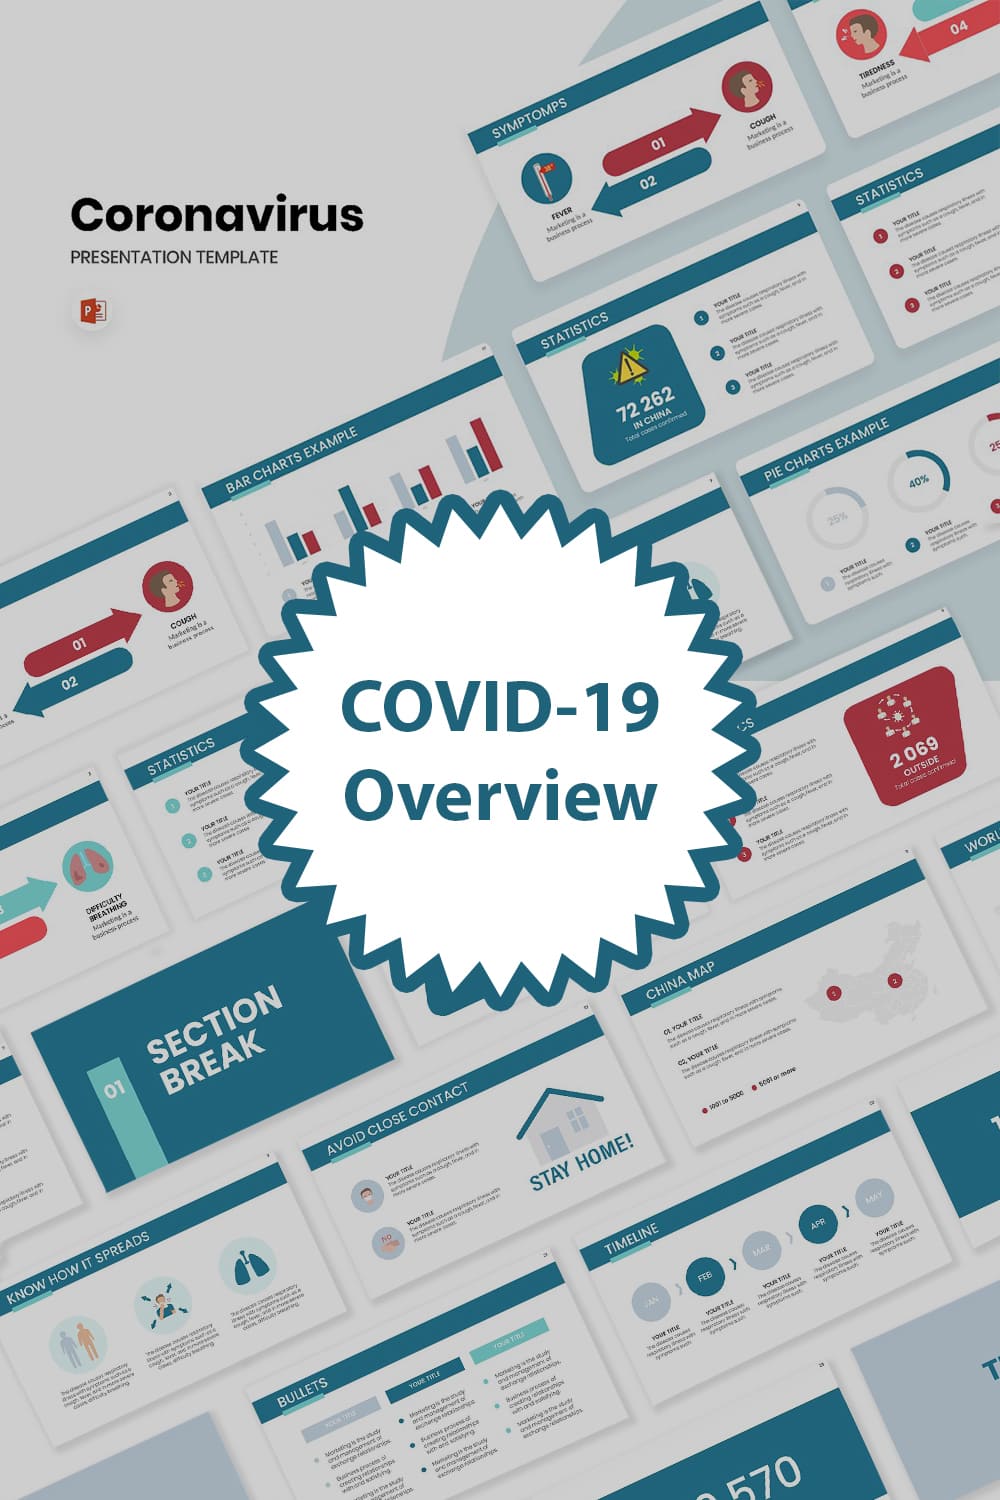 COVID-19 Overview PowerPoint by MasterBundles Pinterest Collage Image.